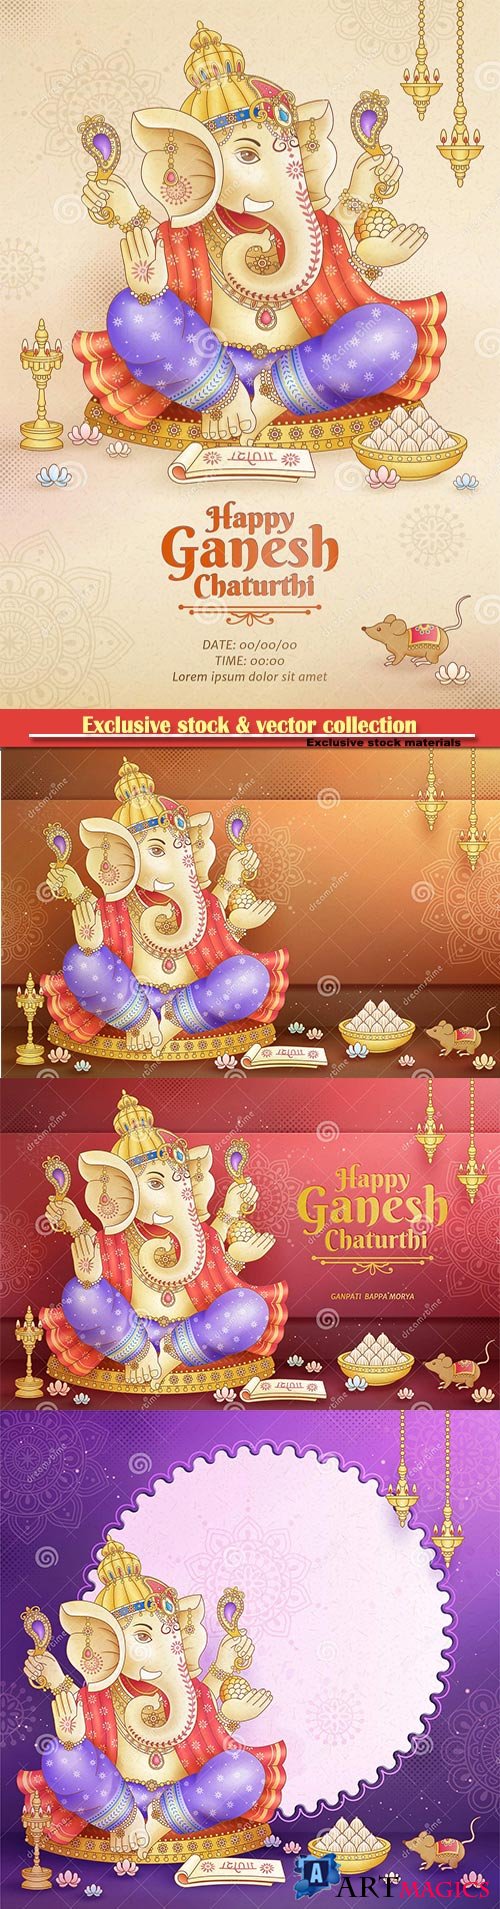 Happy Ganesh Chaturthi poster design with god Ganesha holding ritual implement